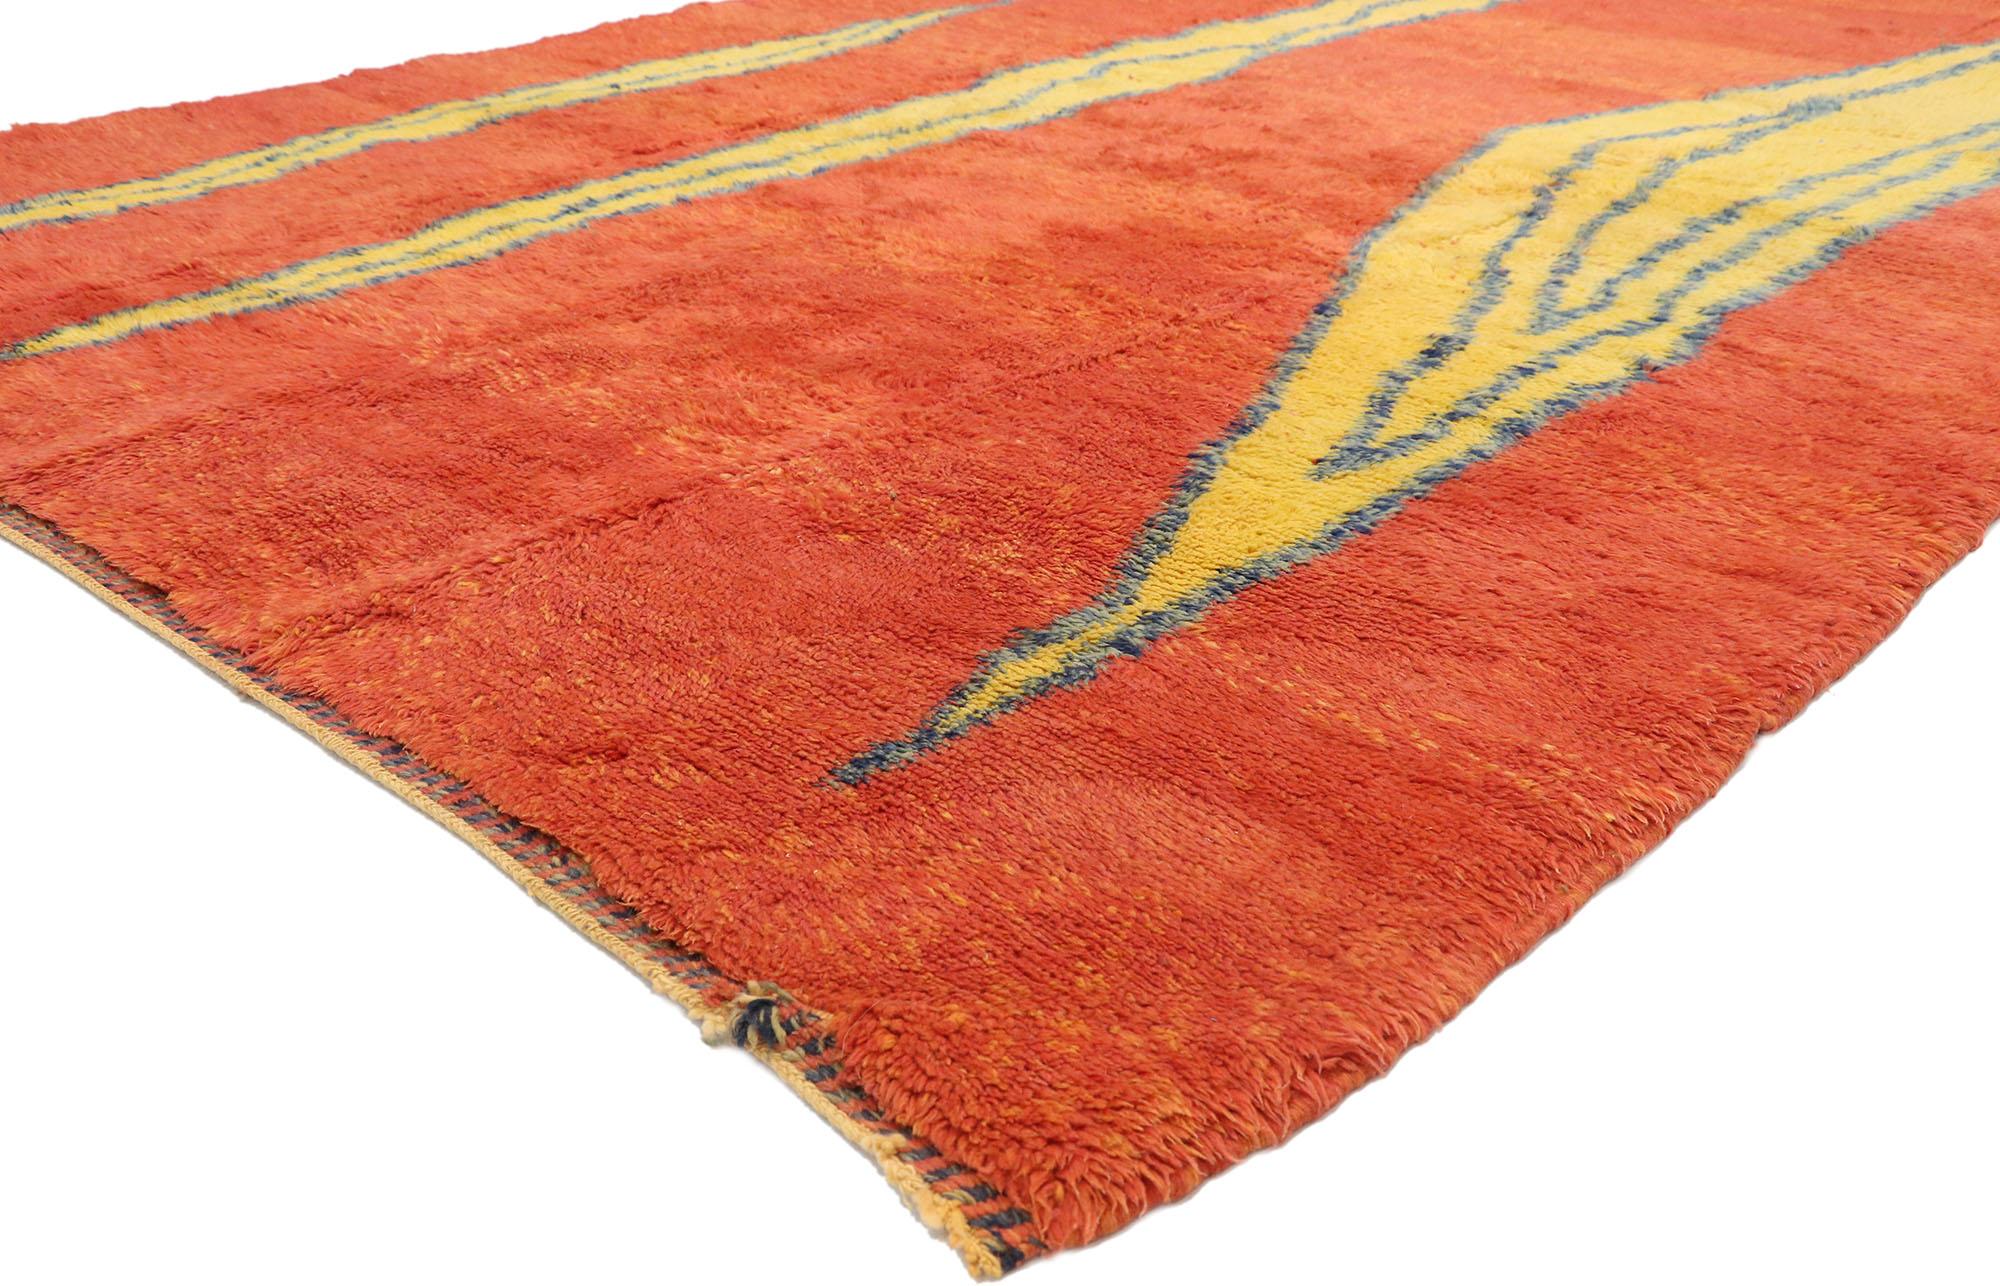 21055 Modern Beni Mrirt Moroccan Rug, 07'01 x 09'09. Beni Mrirt rugs epitomize the esteemed tradition of Moroccan weaving, renowned for their luxurious texture, geometric patterns, and soothing earthy tones. Crafted by skilled artisans of the Beni